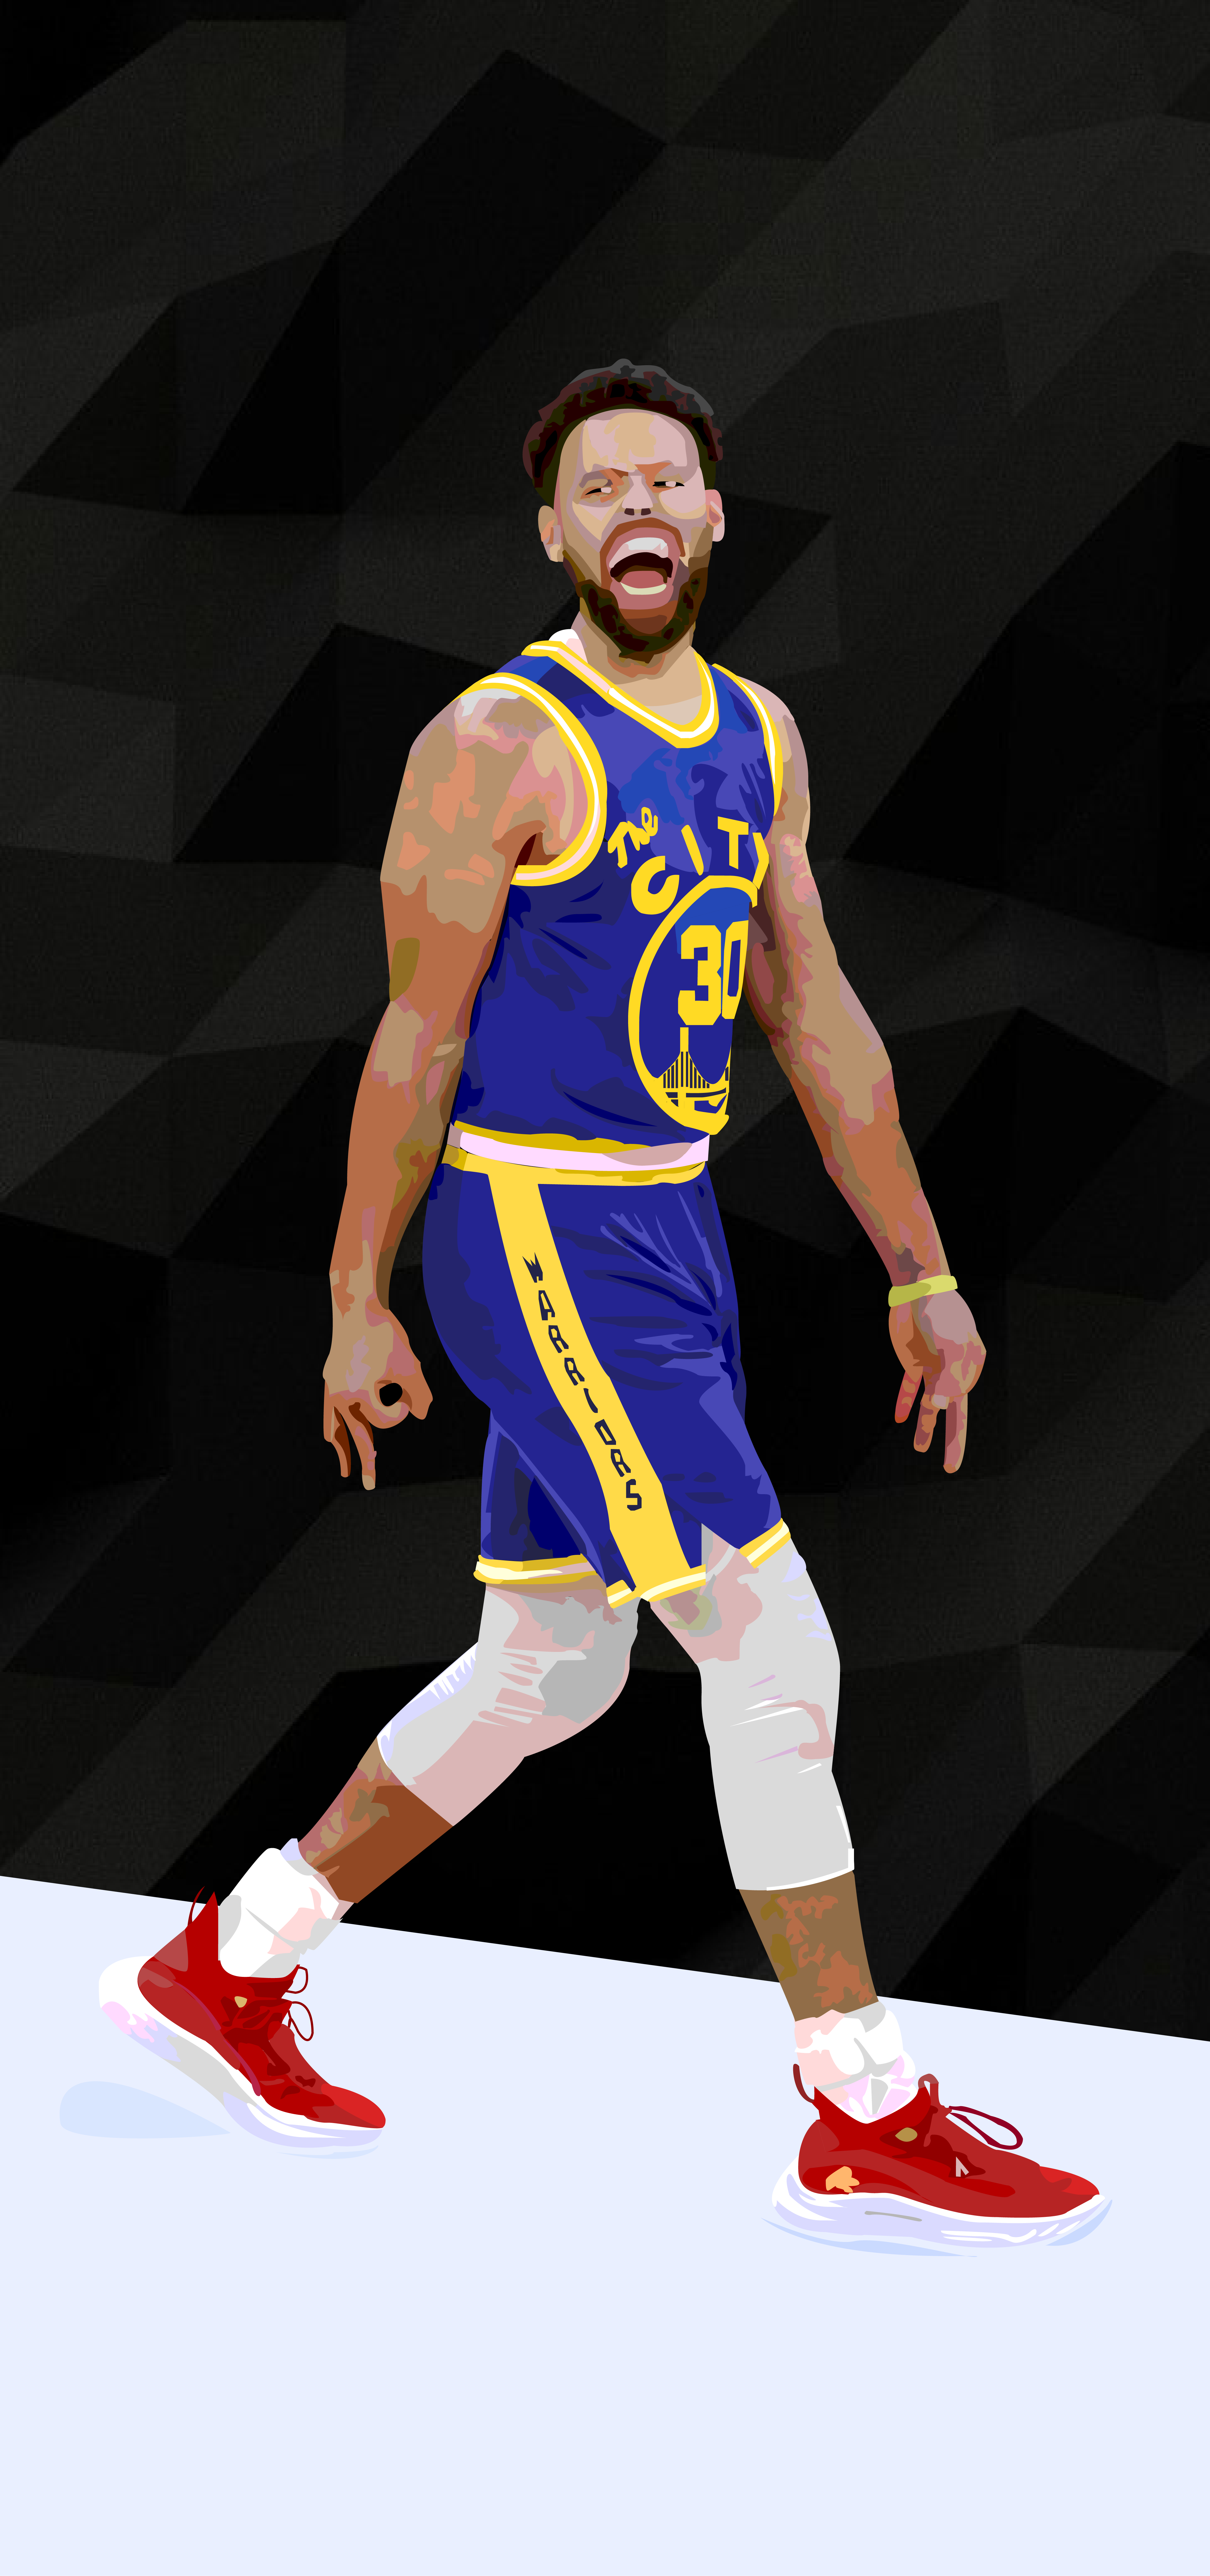 Stephen Curry Wallpapers